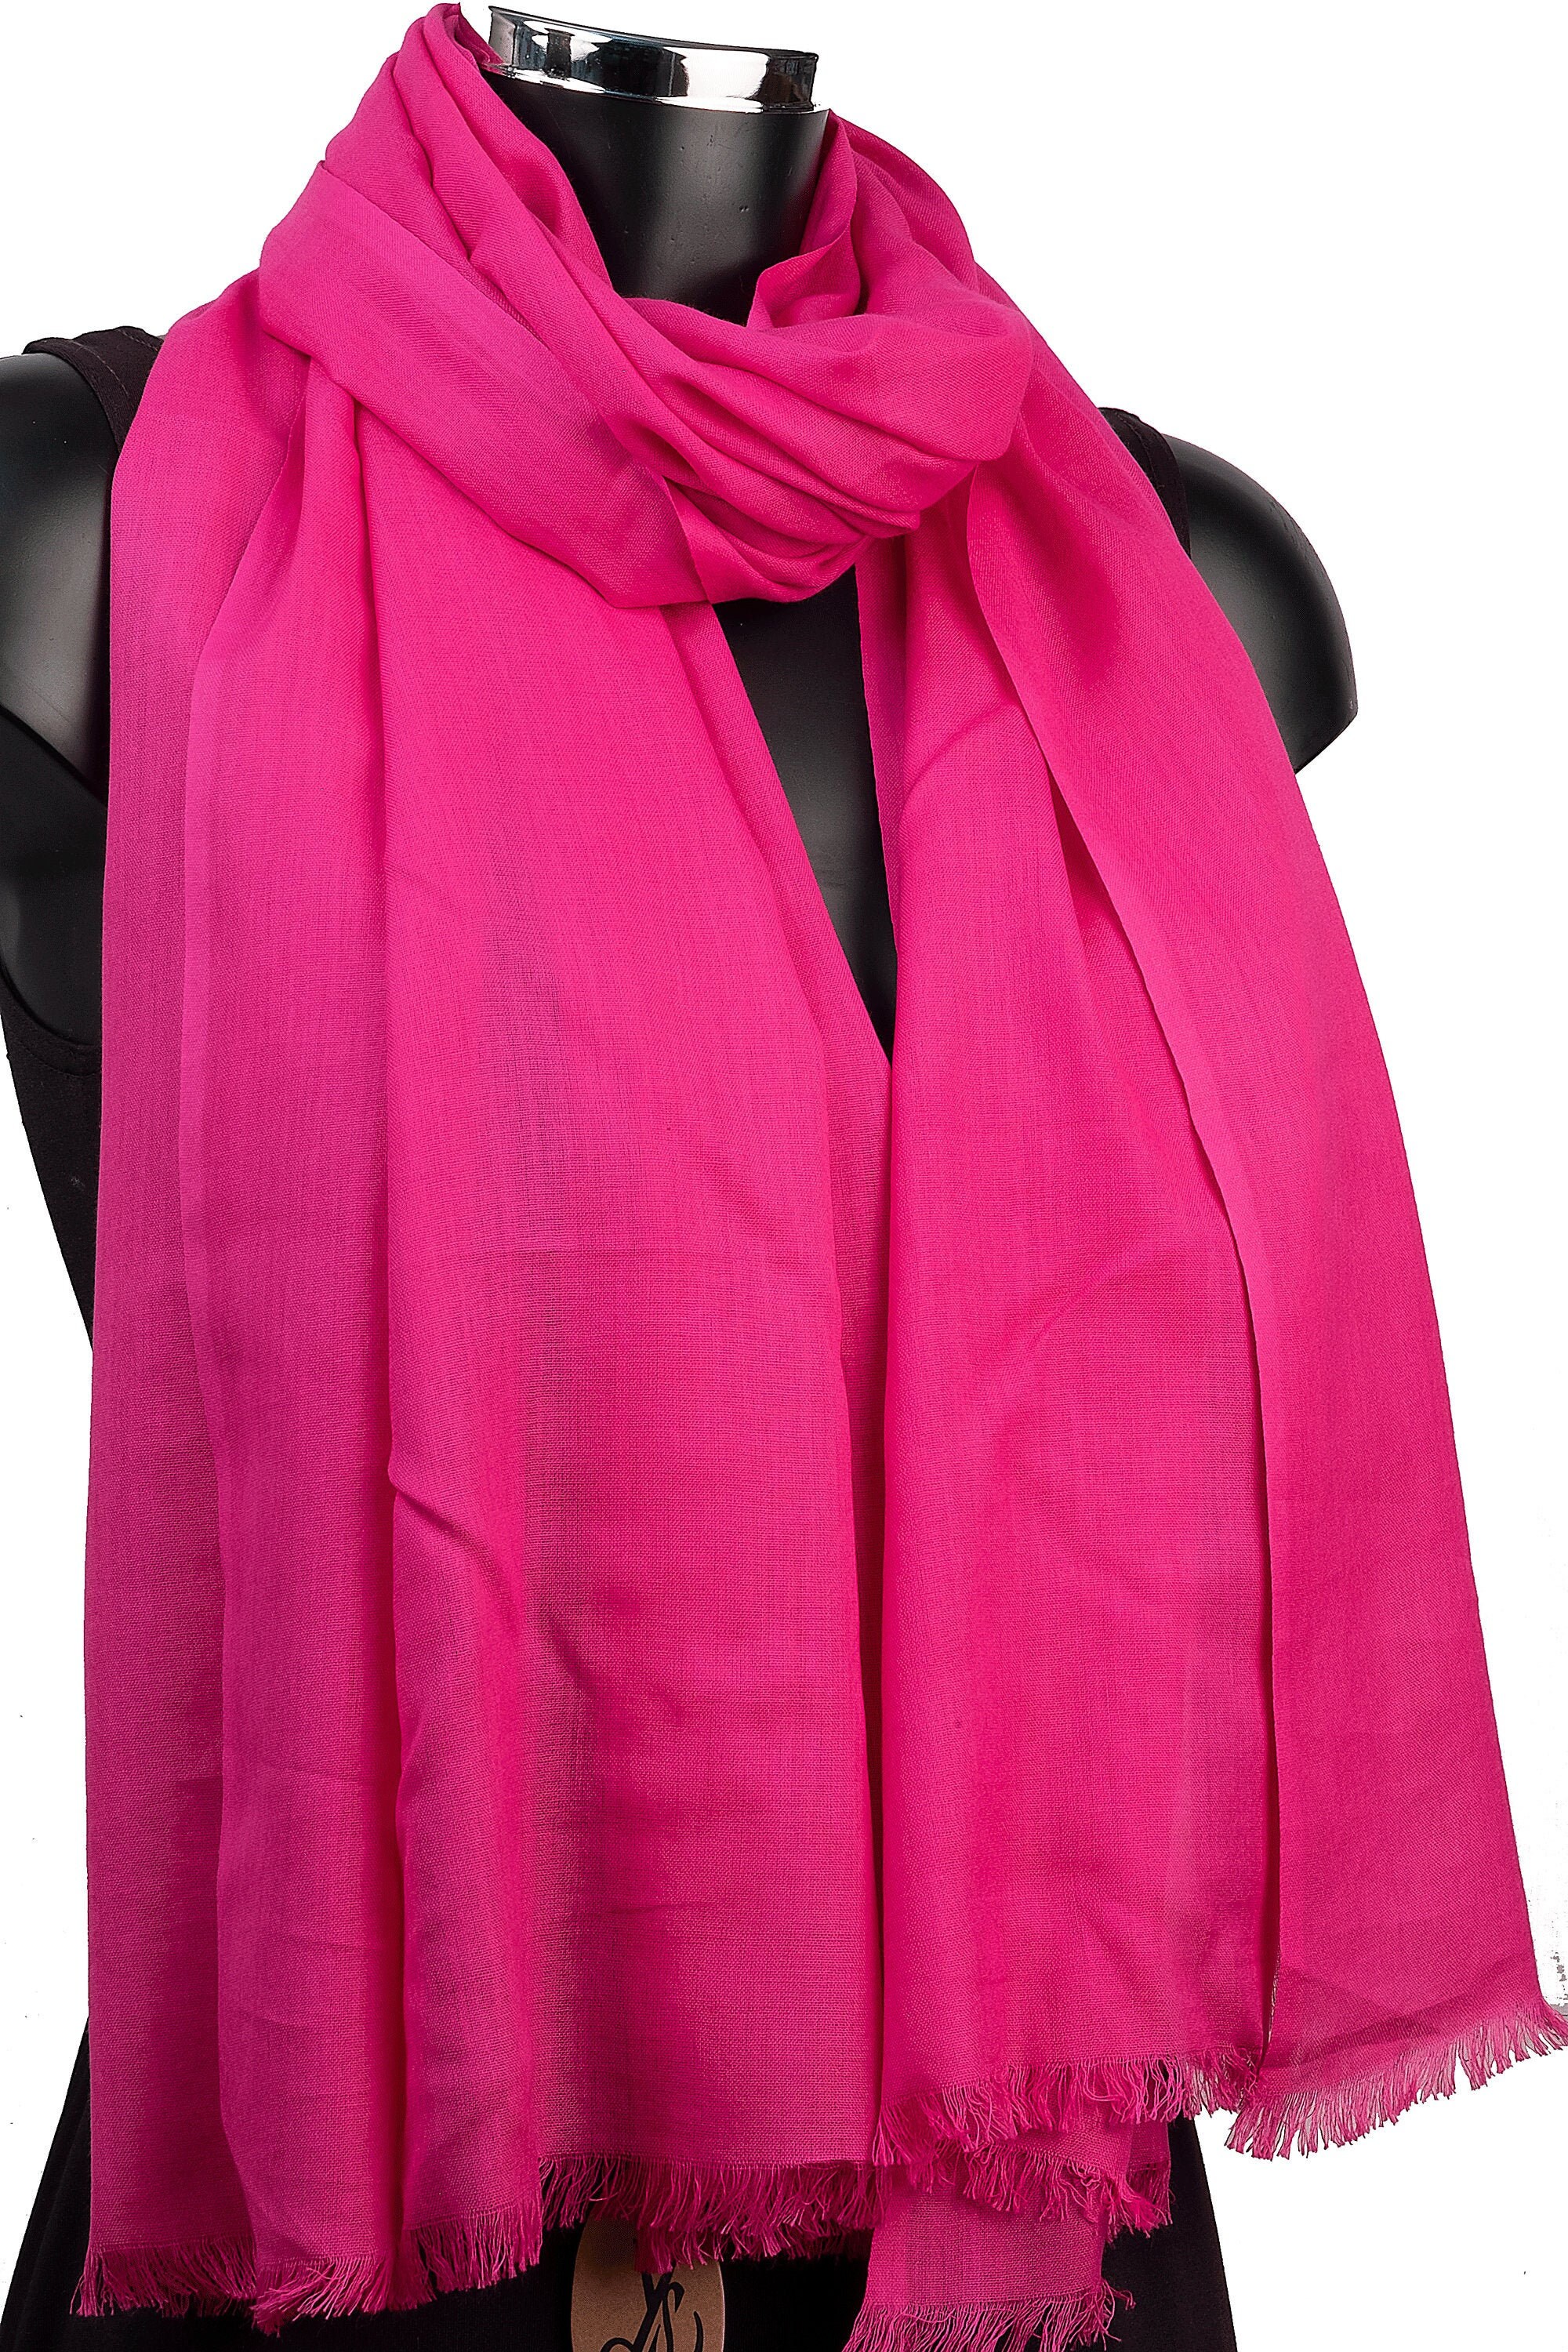 Coach - Authenticated Scarf - Cashmere Pink Plain for Women, Never Worn, with Tag